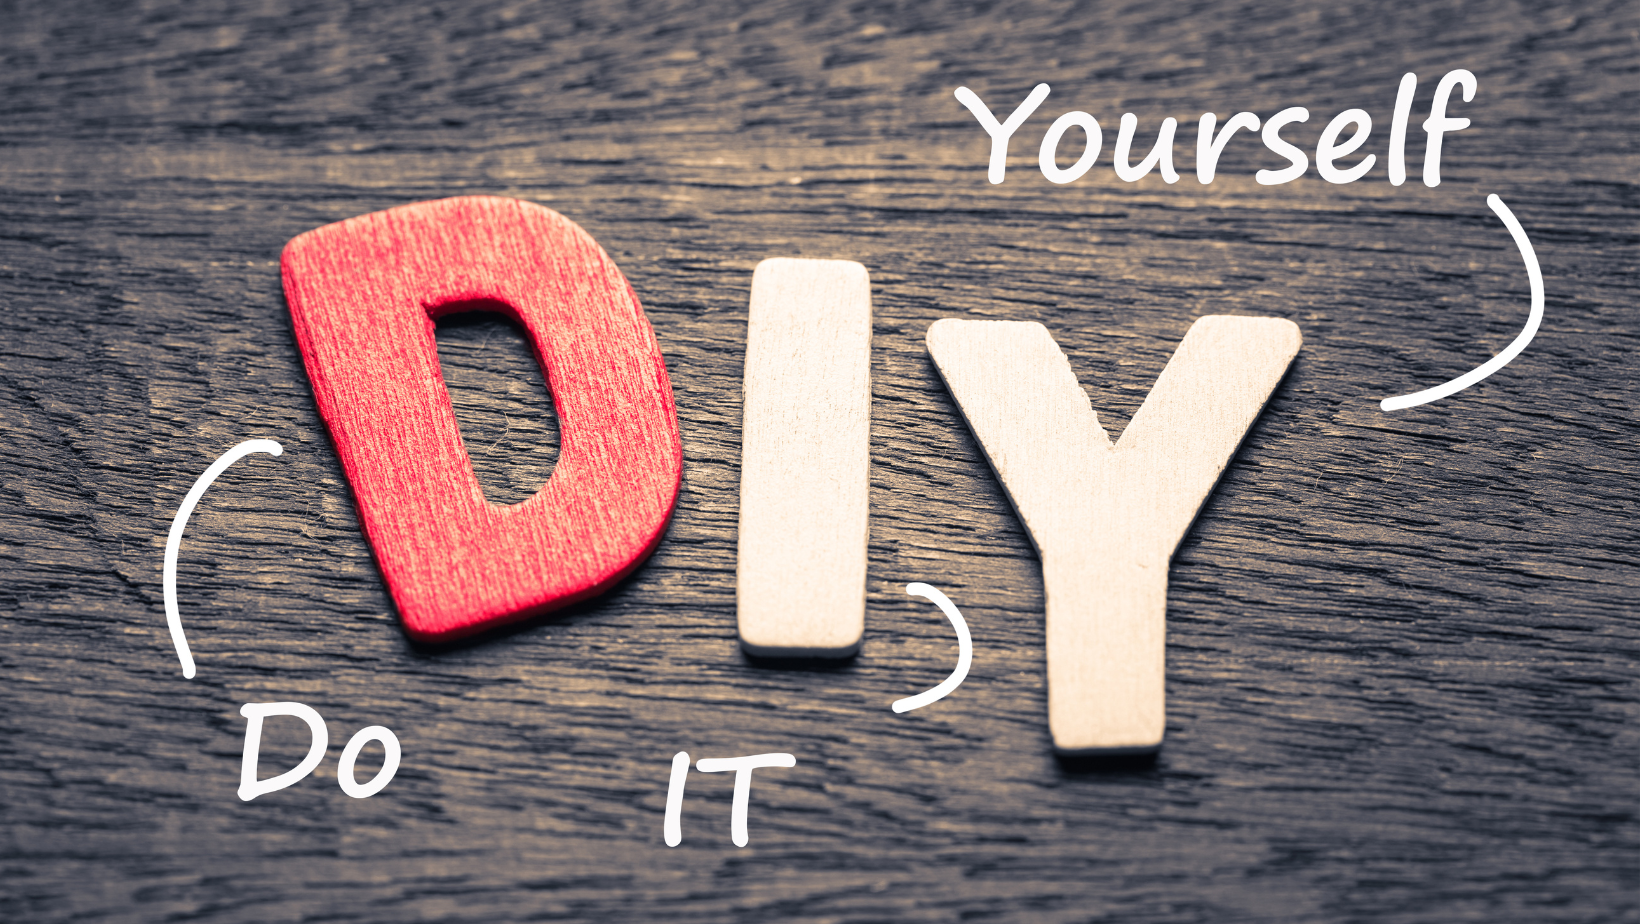 DIY do it yourself text